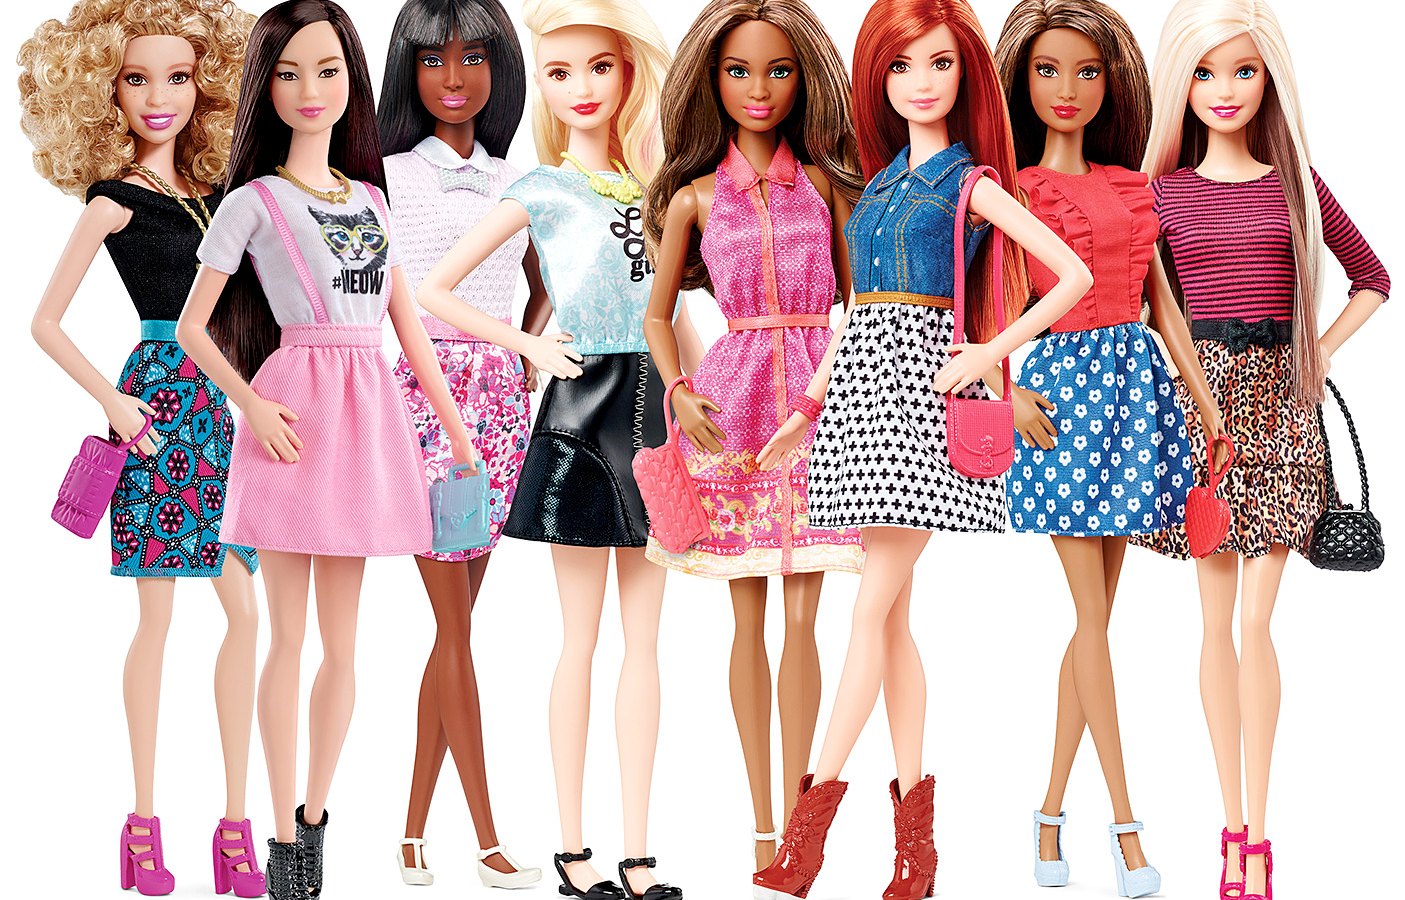 For the first time in 56 years, Barbie will be able to wear flats.